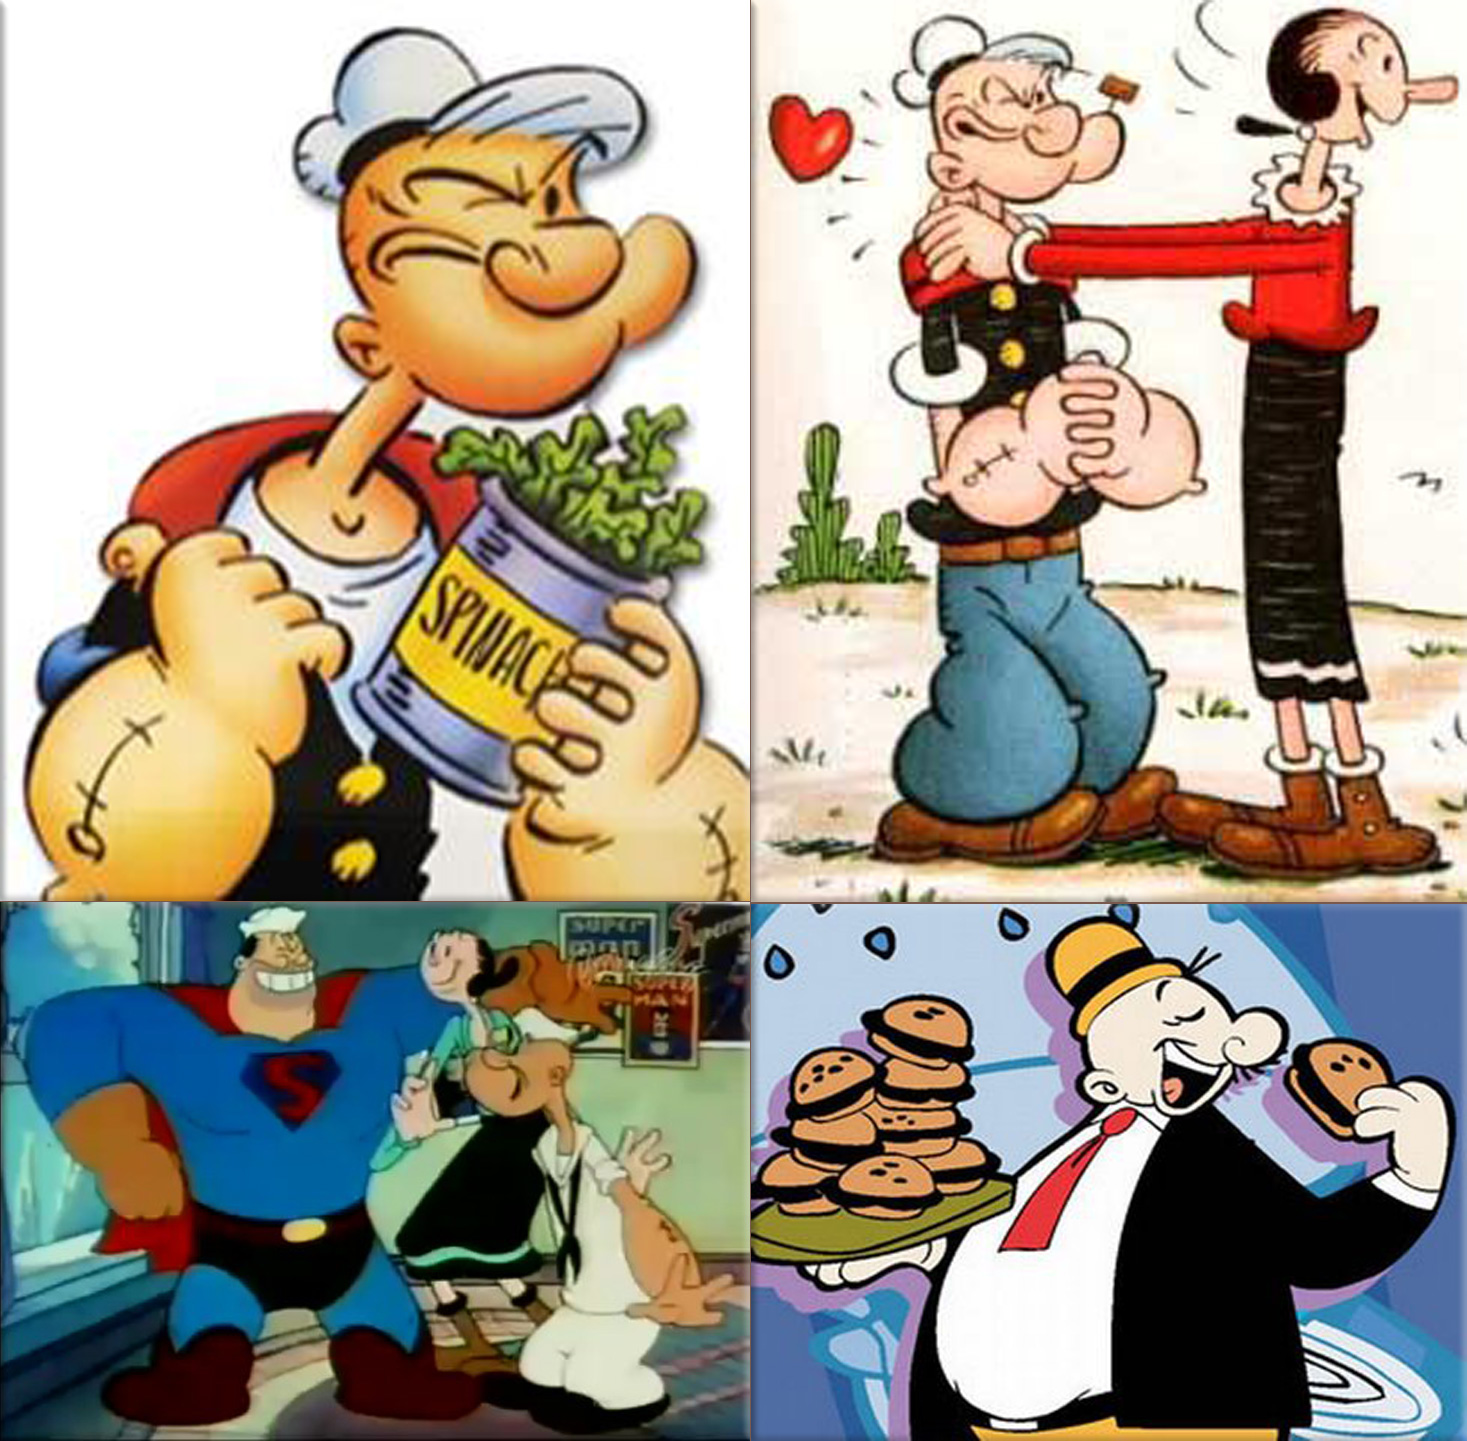 Popeye the Sailor is a cartoon fictional character created by Elzie Crisler Segar, who has appeared in comic strips and animated cartoons in the cinema as well as on television